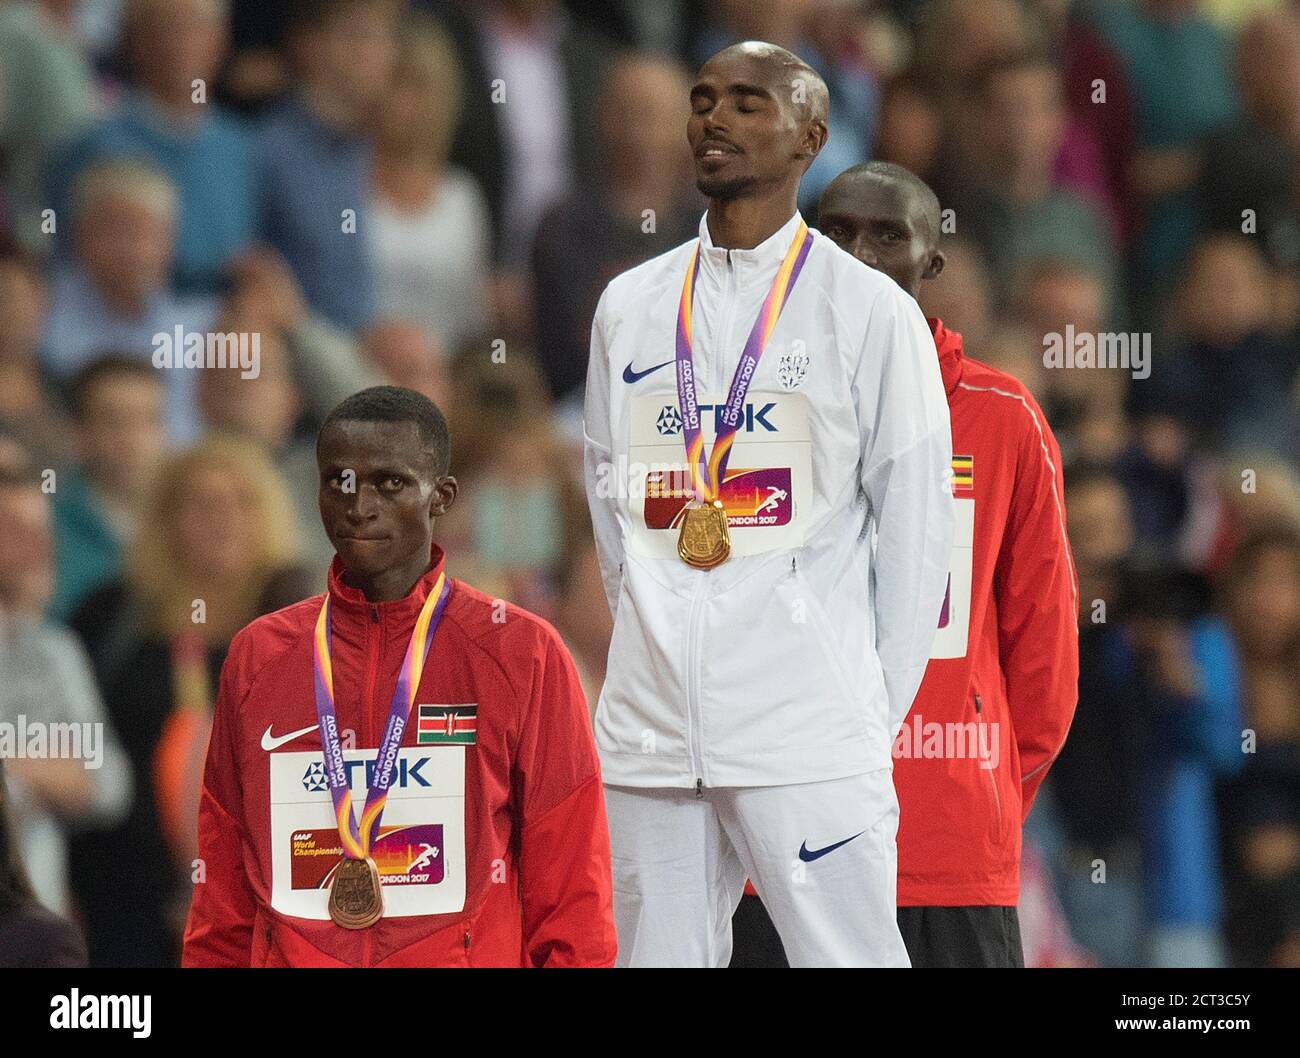 Mo Farah on the medal podium during the National Anthem after wining  the 10,000m. World Athletics Championships.Picture : © Mark Pain / Alamy Stock Photo